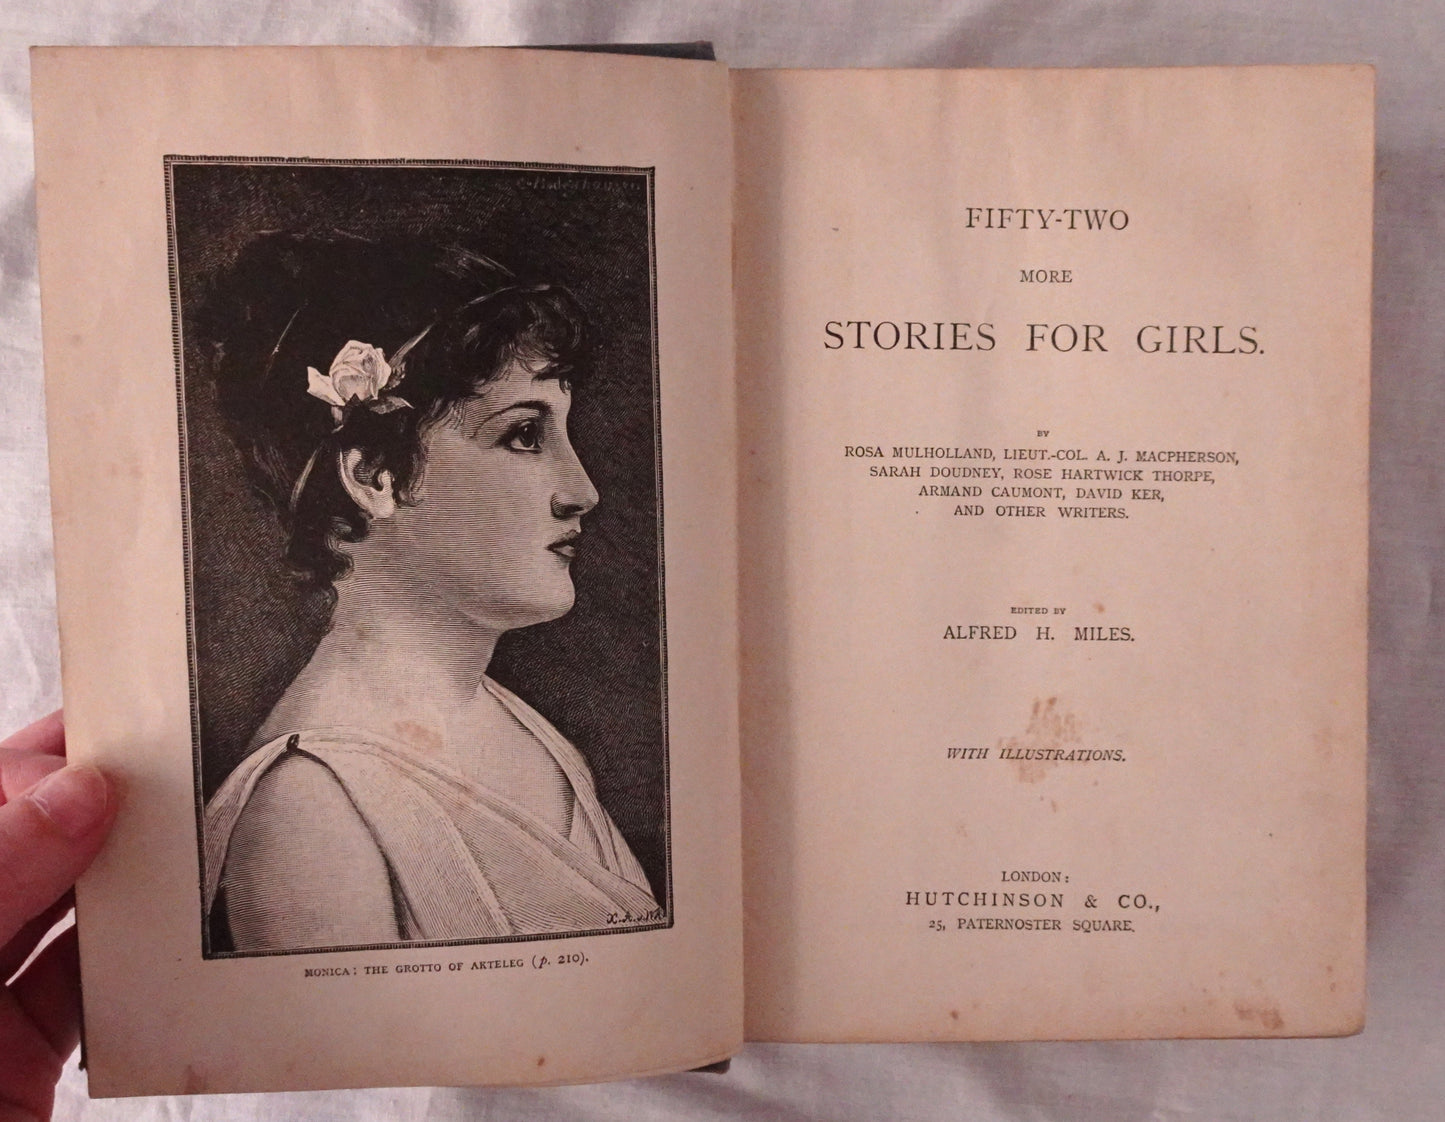 Fifty-Two More Stories For Girls by Alfred H. Miles